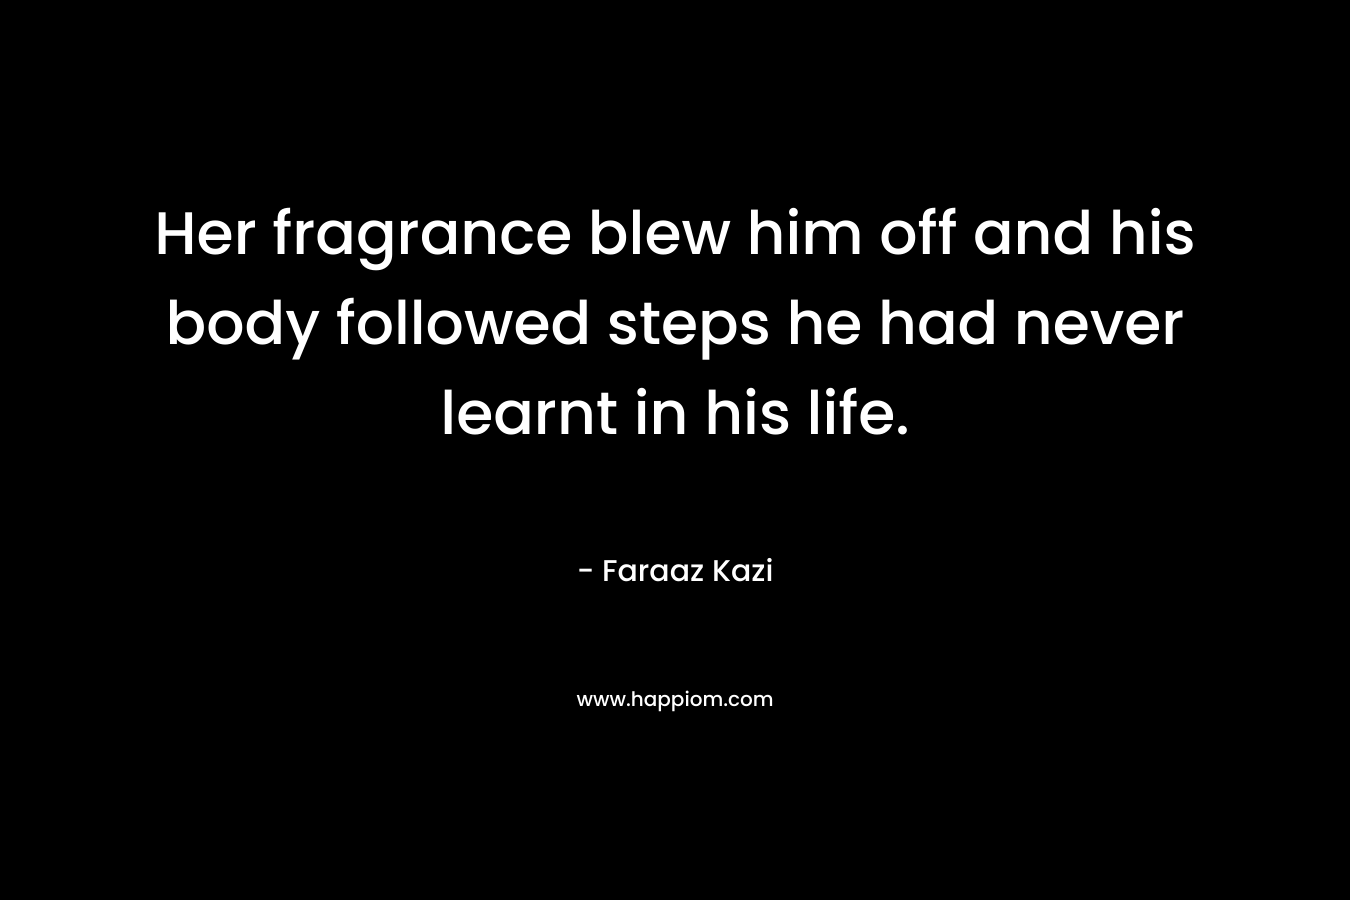 Her fragrance blew him off and his body followed steps he had never learnt in his life. – Faraaz Kazi